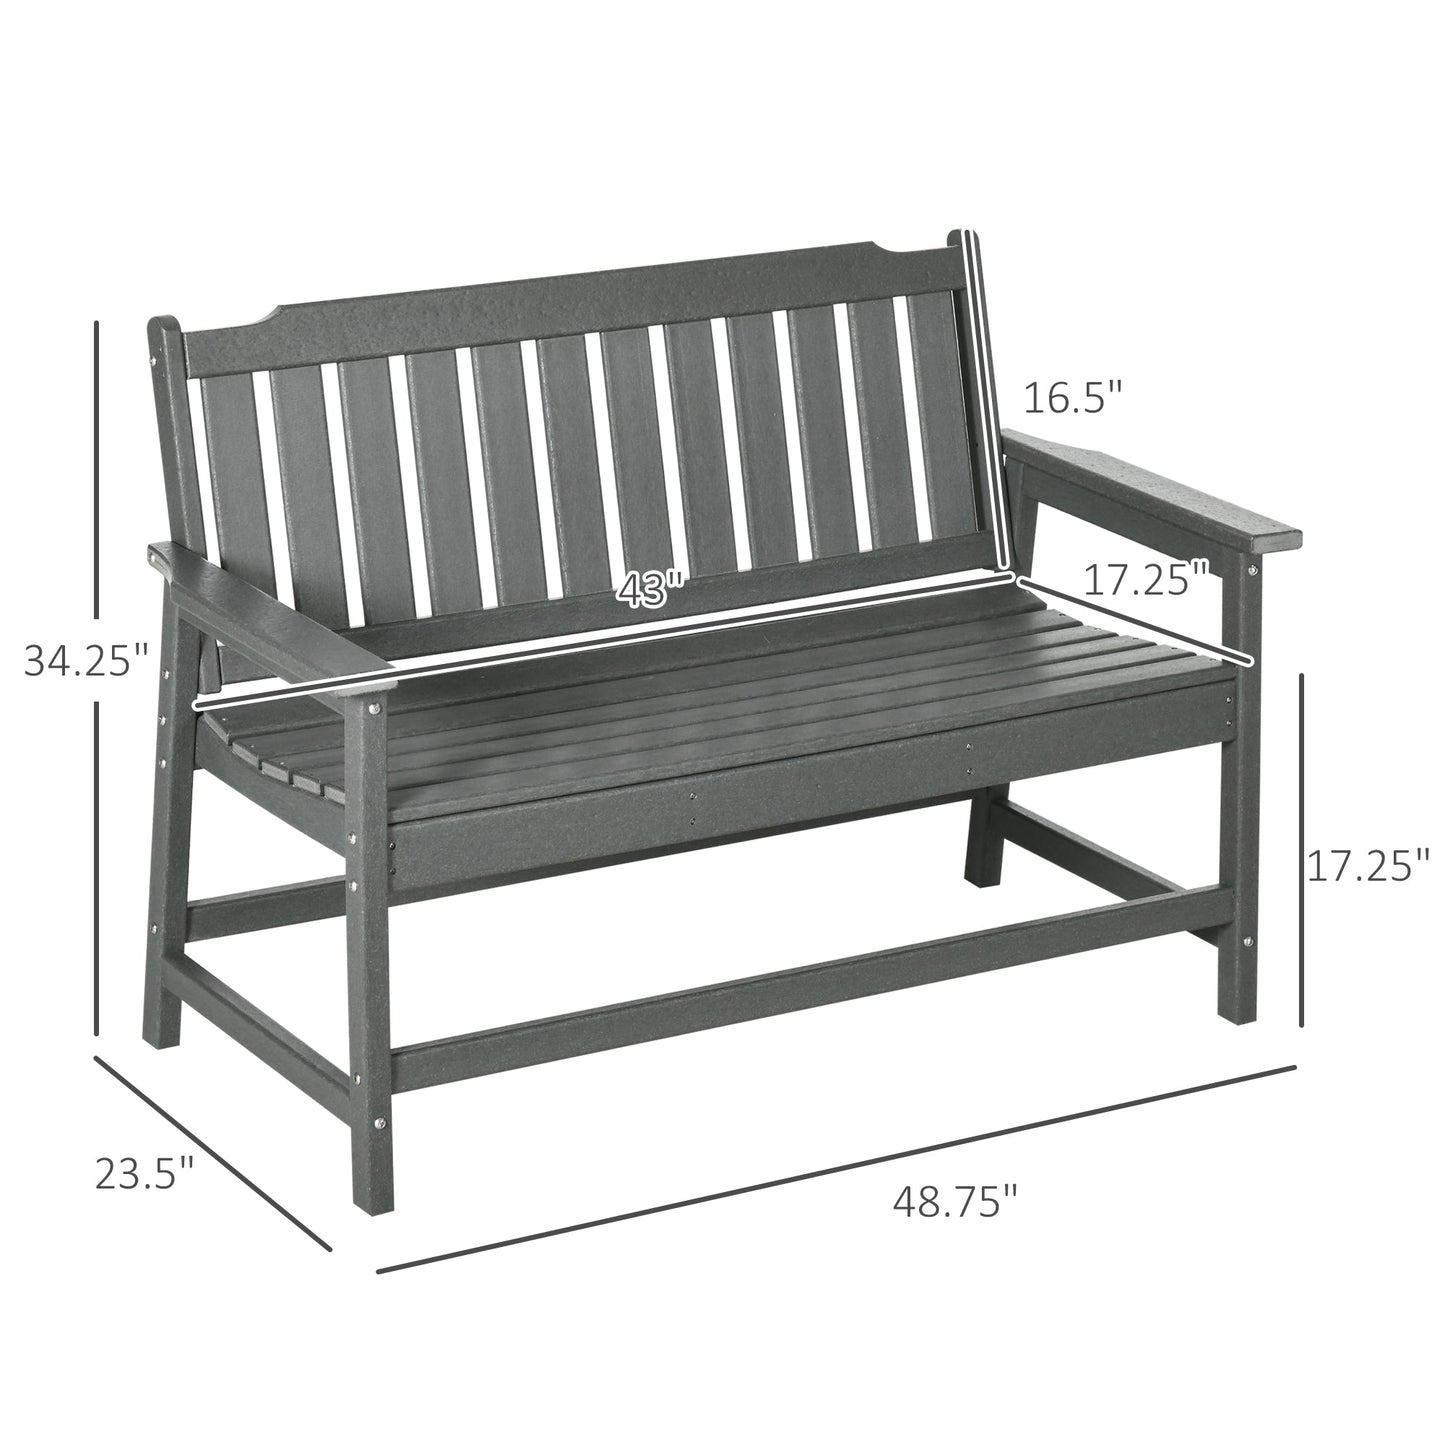 Outdoor and Garden-Outdoor Bench with Backrest and Armrests - Outdoor Style Company